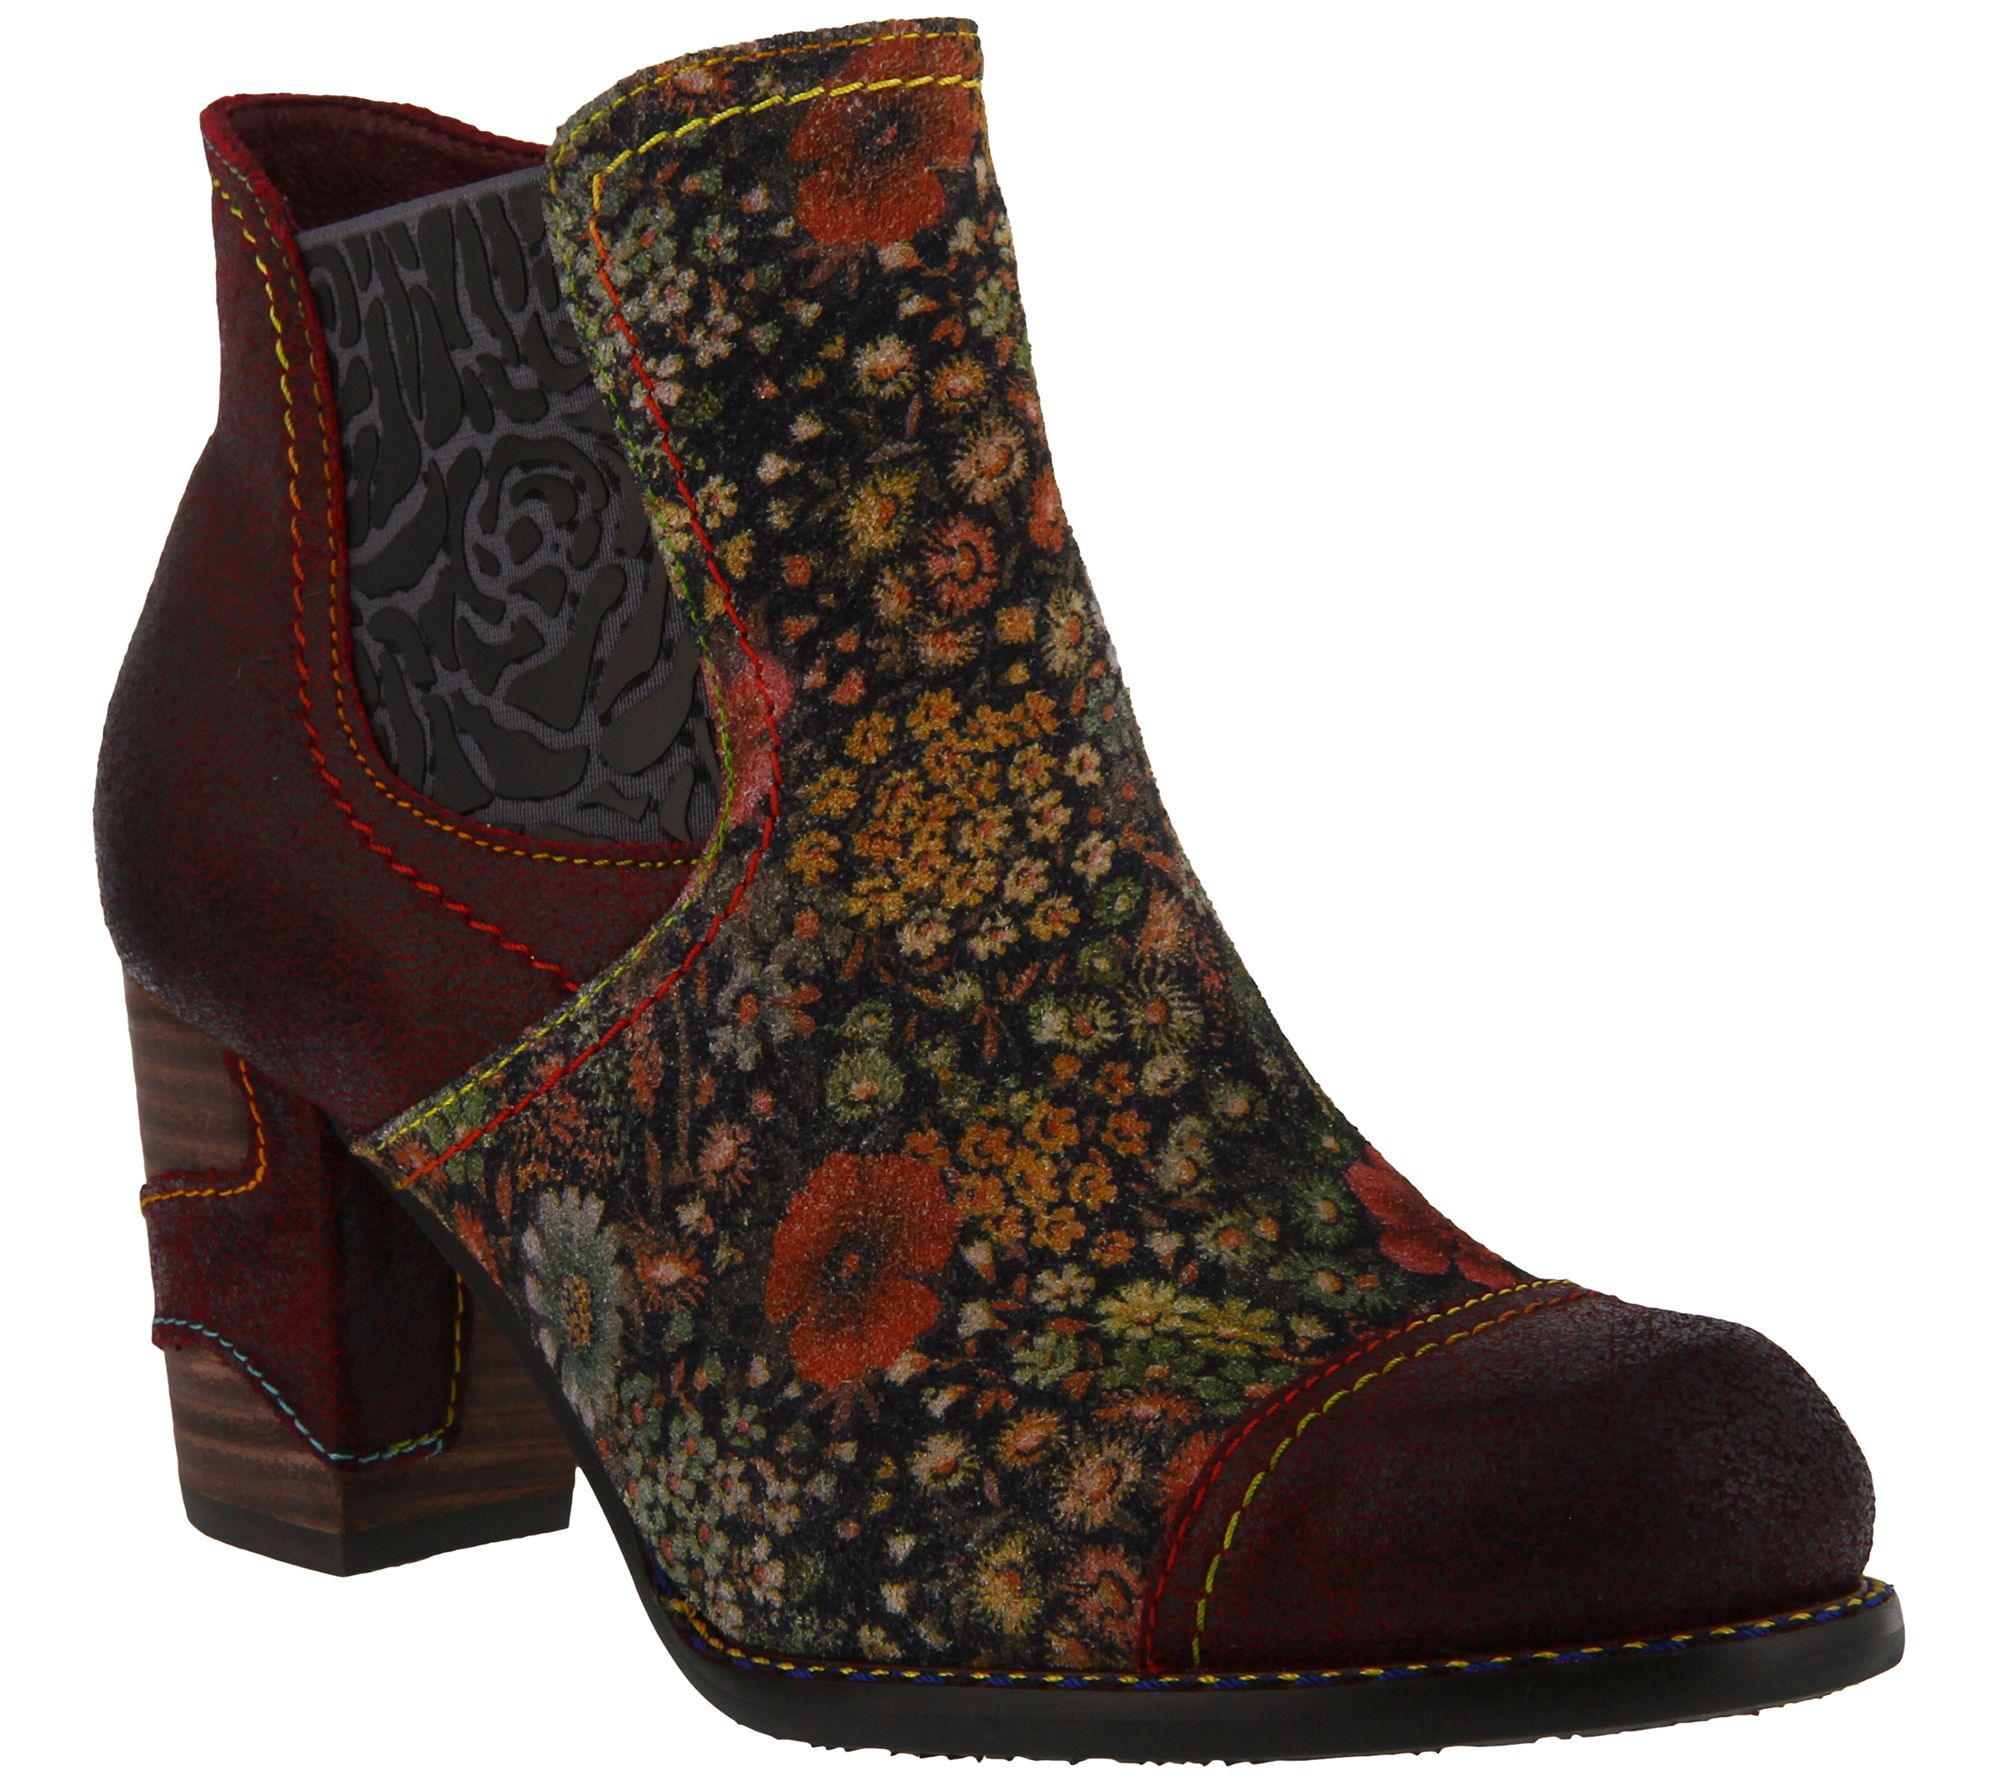 L'Artiste by Spring Step Leather Ankle Boots -Melvina - QVC.com